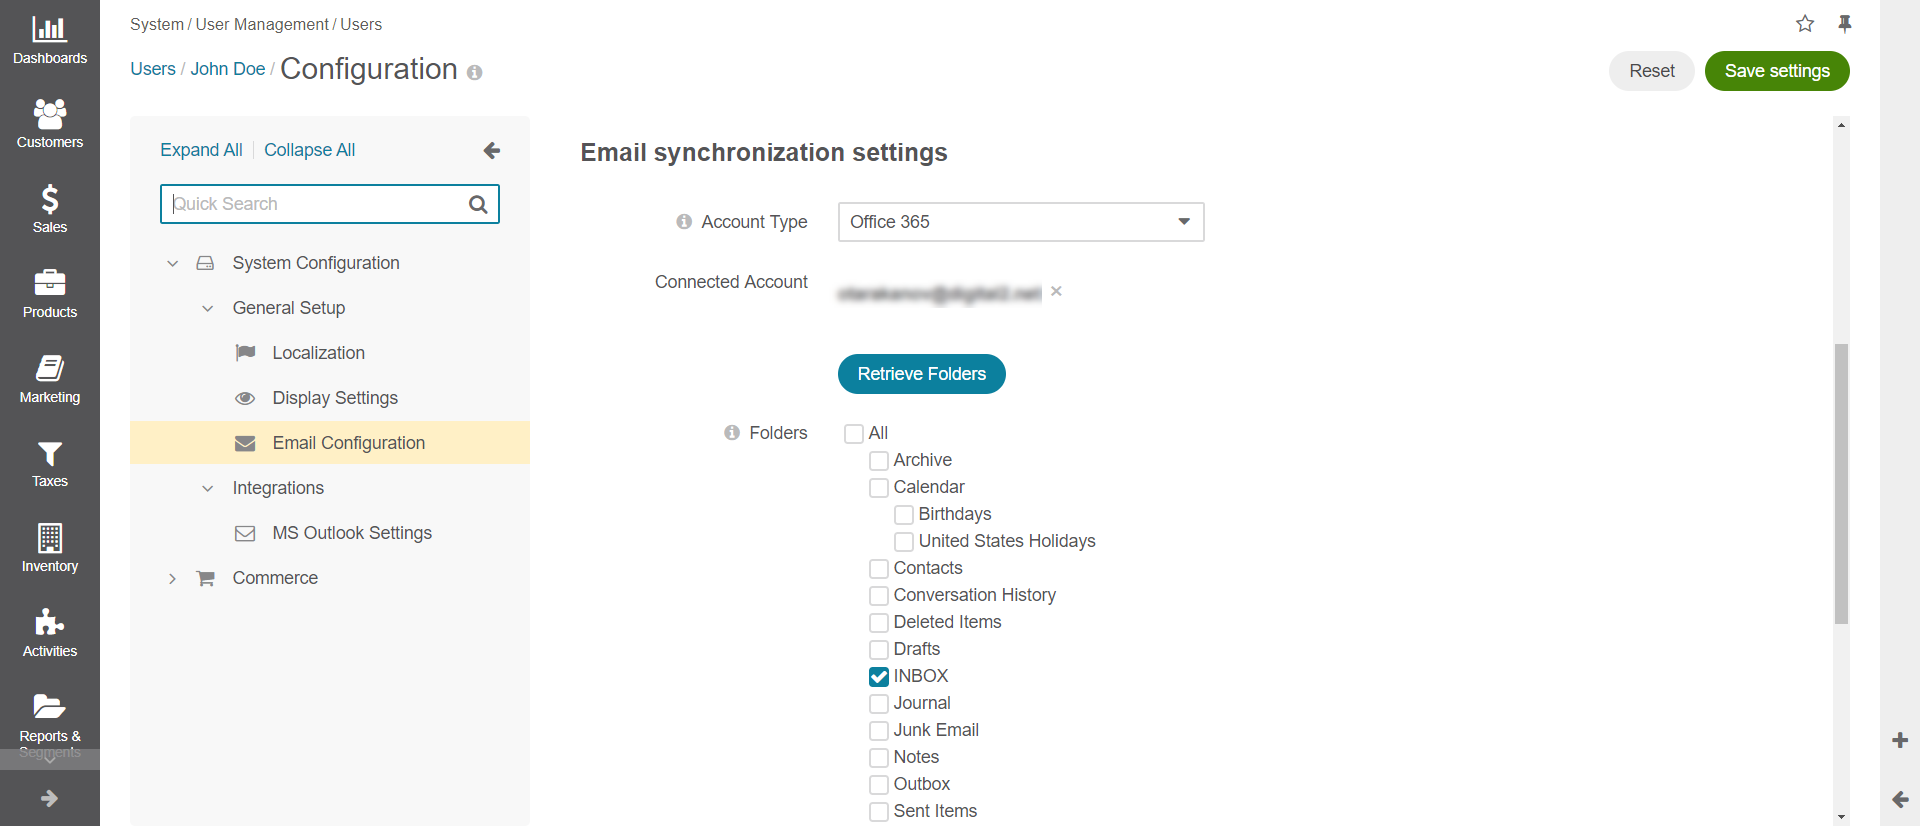 Email synchronization settings for Office 365